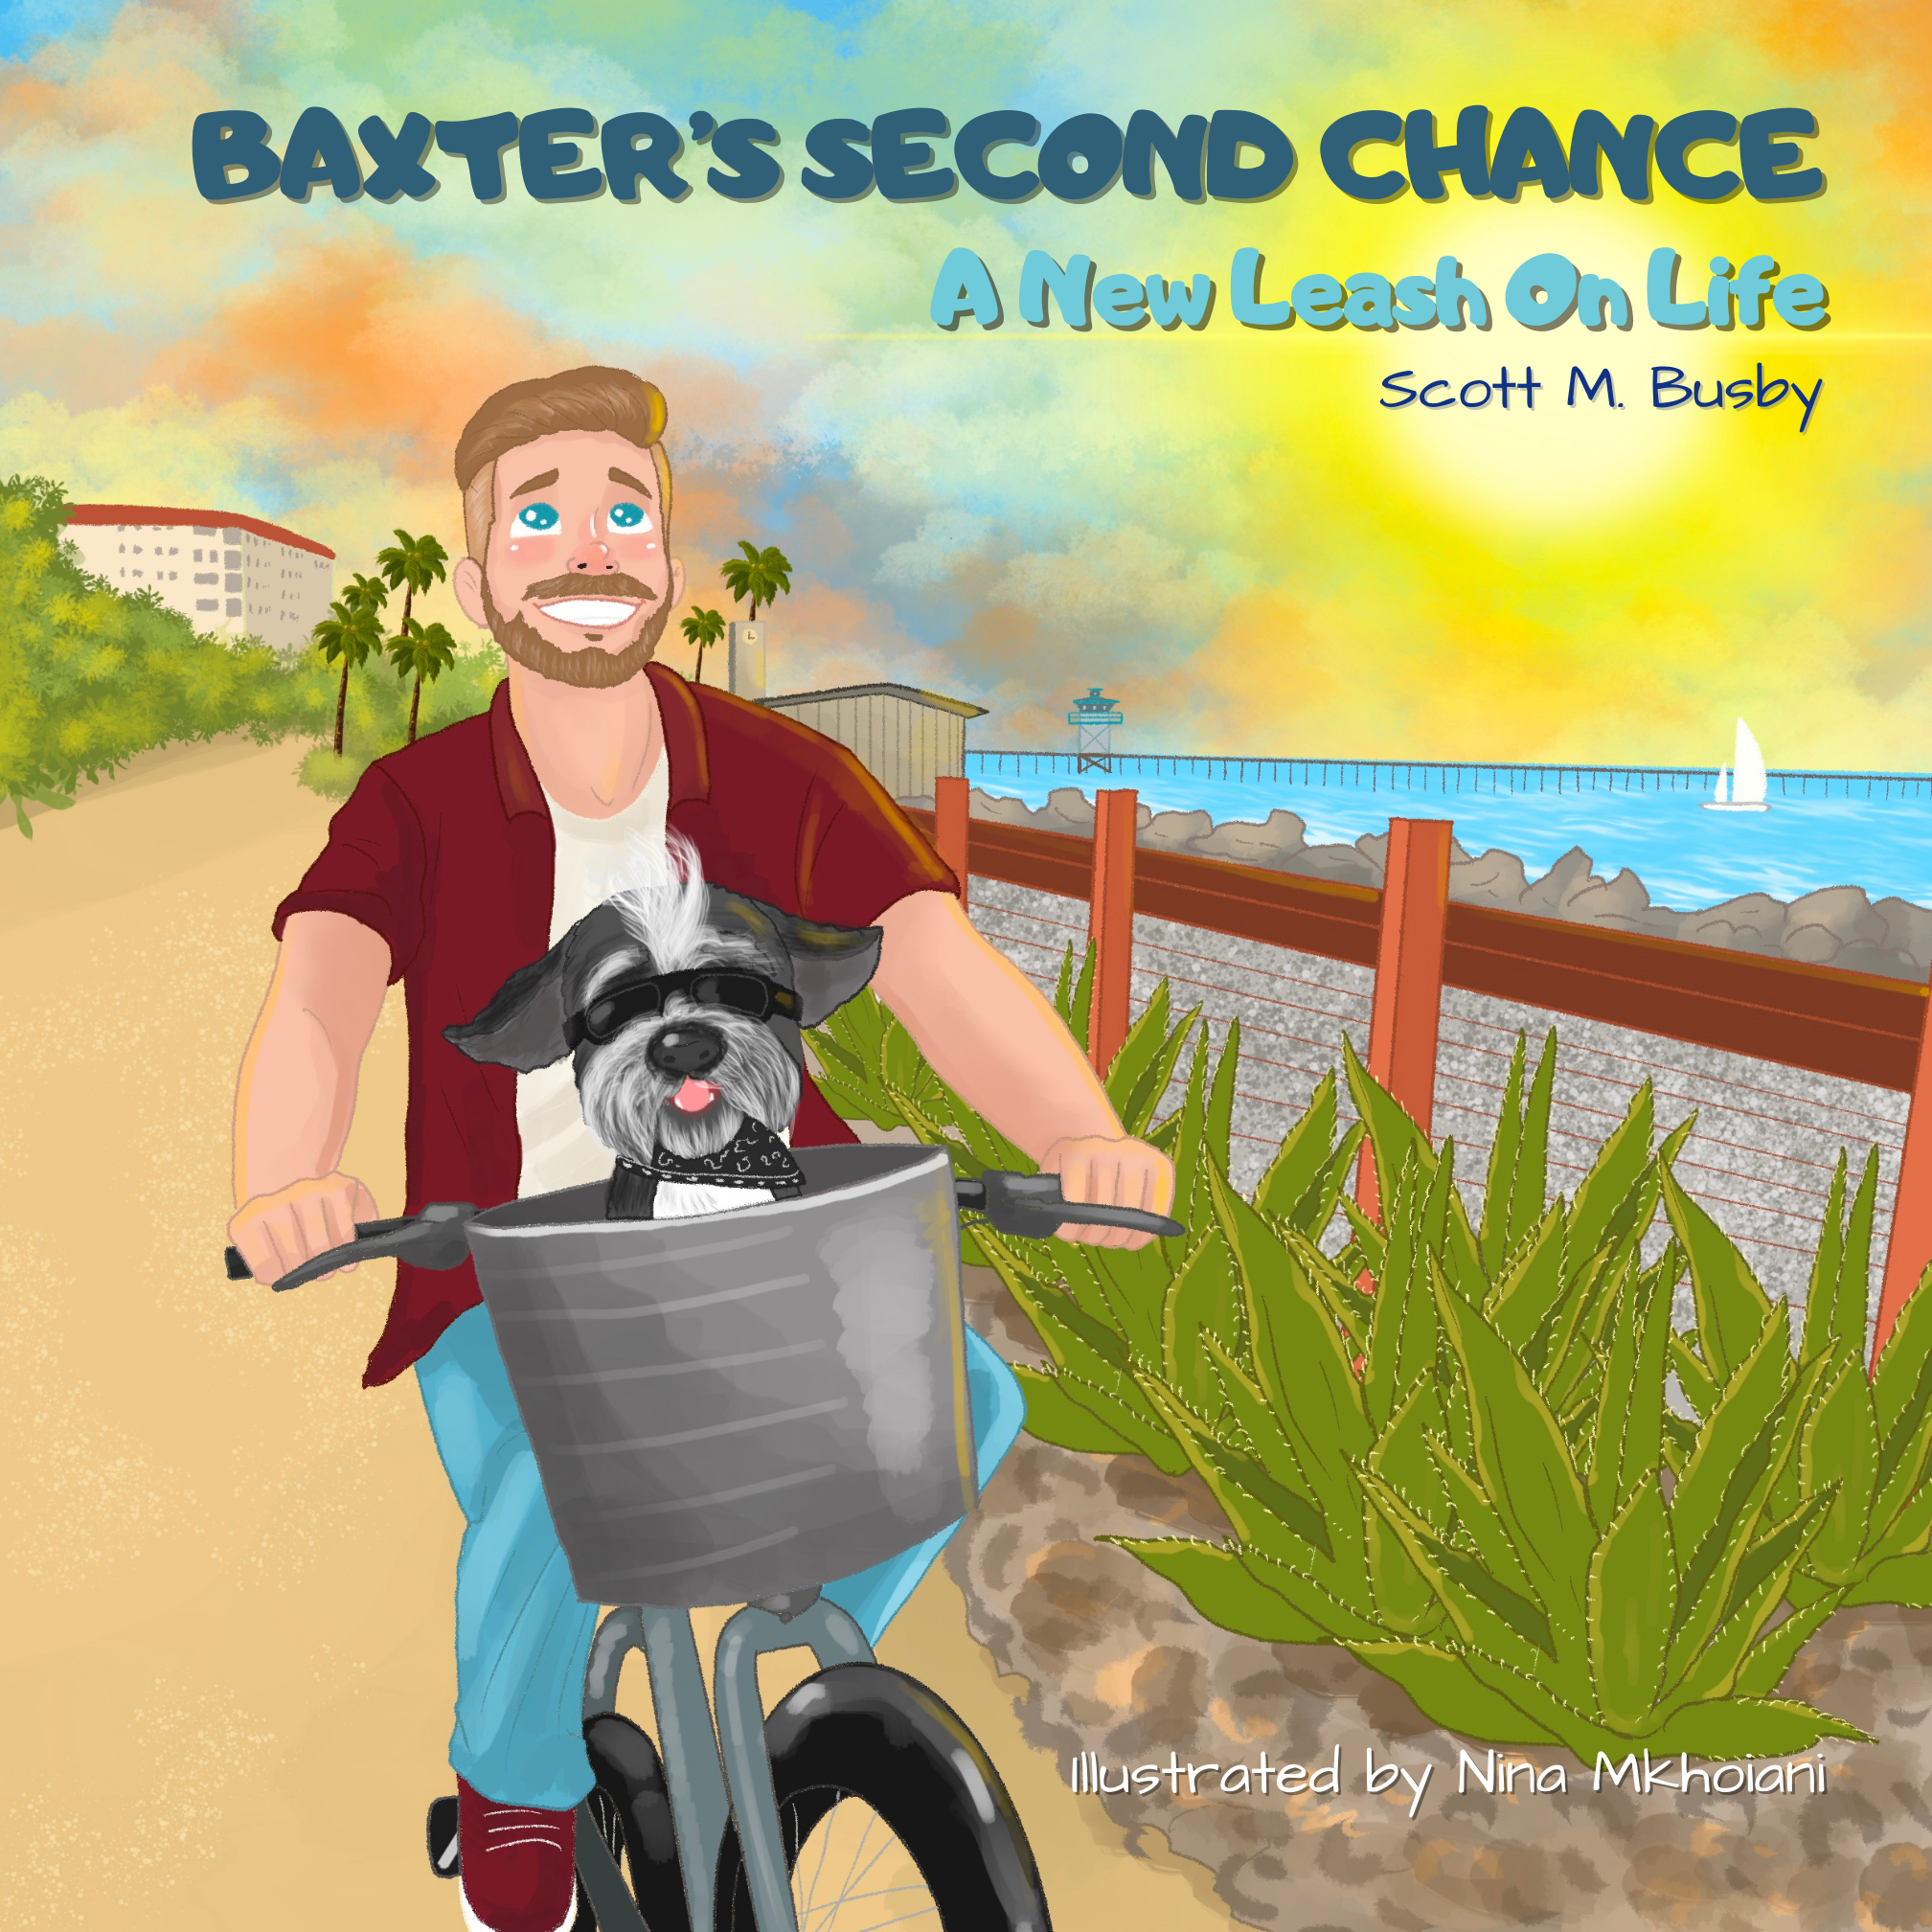 Baxter's Second Chance: A New Leash On Life - Children's Illustrated Book (Hardcover - Author's Edition)